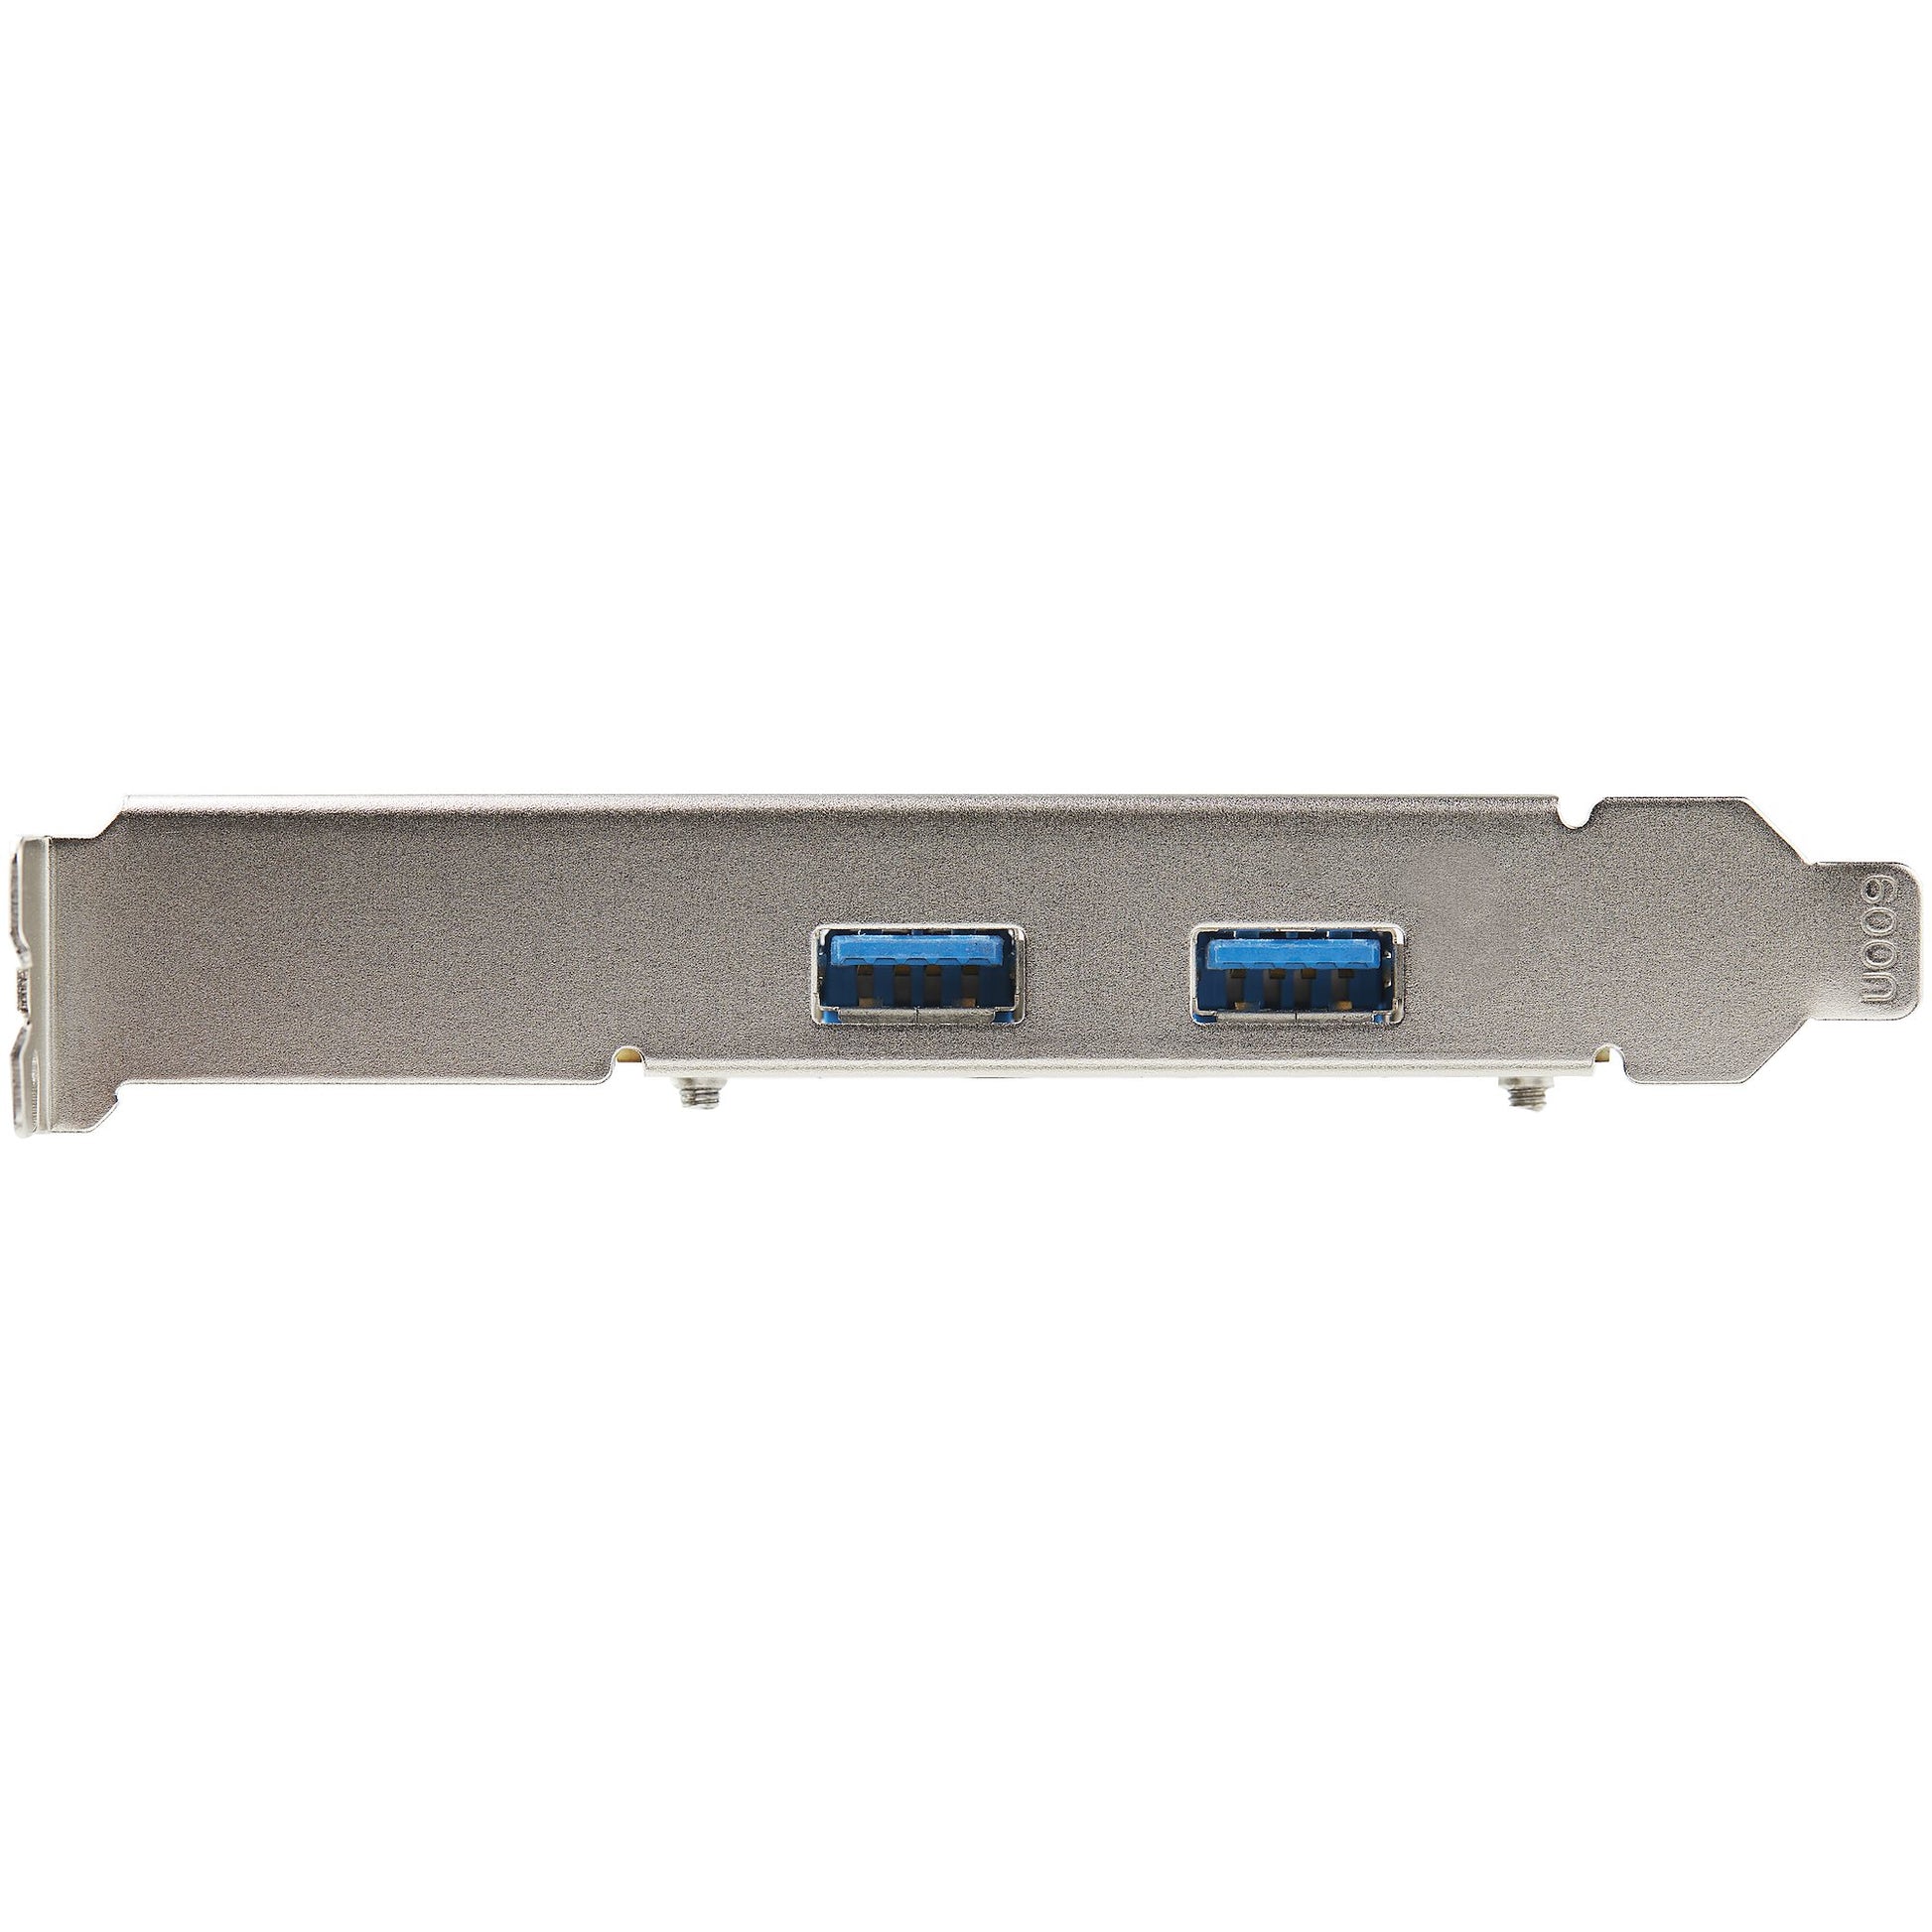 StarTech.com 2-Port USB PCIe Card with 10Gbps/port - USB 3.1/3.2 Gen 2 Type-A PCI Express 3.0 x2 Host Controller Expansion Card - Add-On Adapter Card - Full/Low Profile - Windows & Linux-2